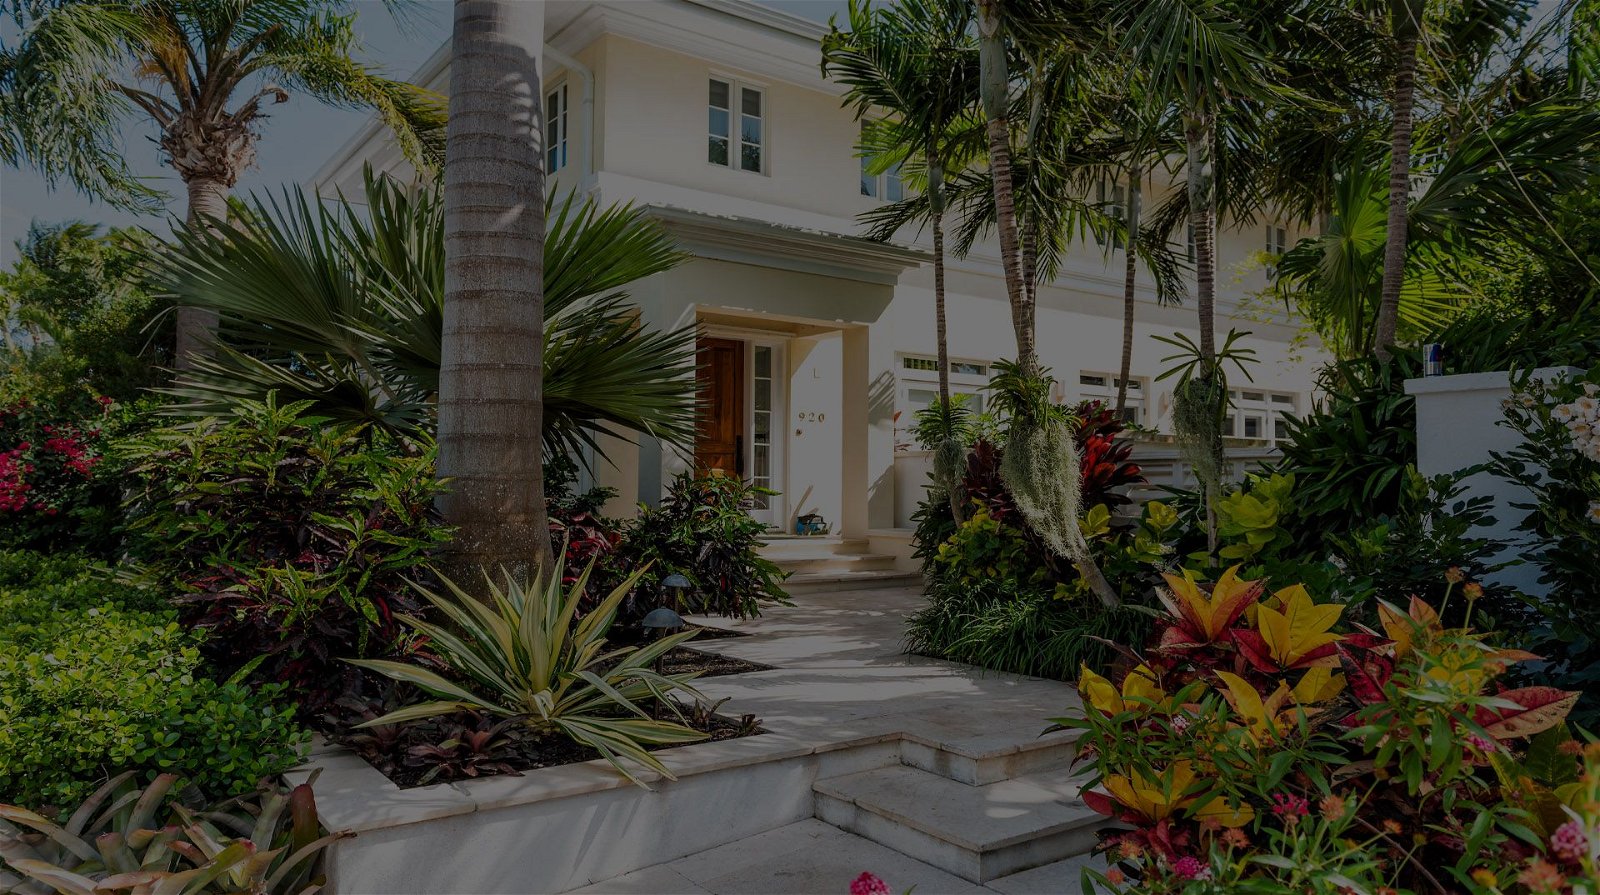 key west mortgage, mortgage for key west mortgage lender, key west mortgage broker, key west mortgage rates, key west mortgage calculator, key west condo financing, key west condo mortgages, key west condotel financing, key west condotel mortgage, key west mortgage rates,